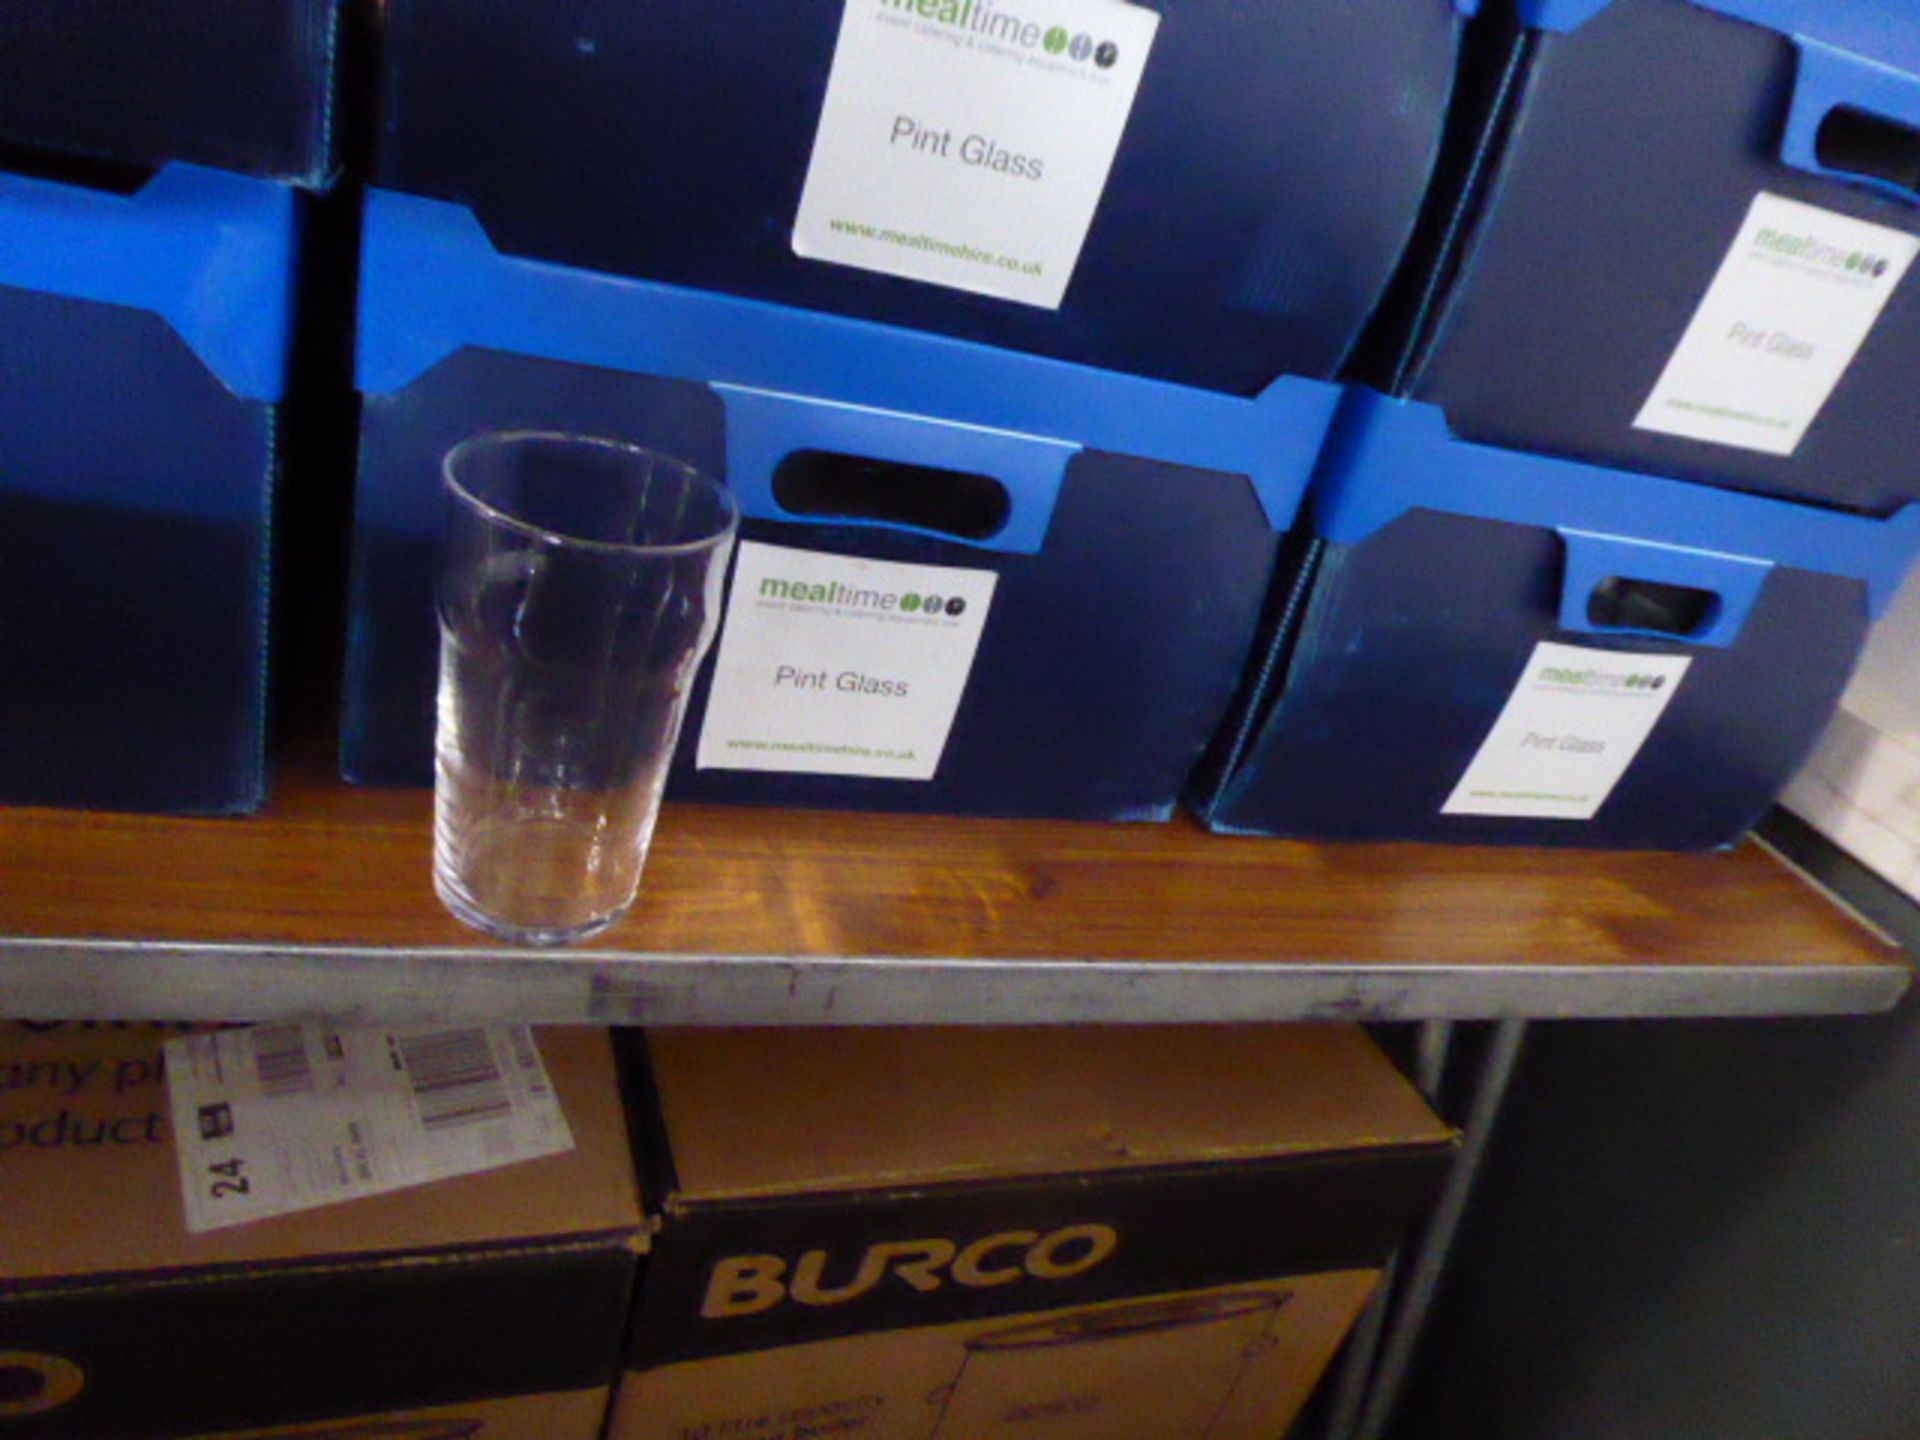 Stack of 6 plastic boxes containing approximately 90 pint glasses